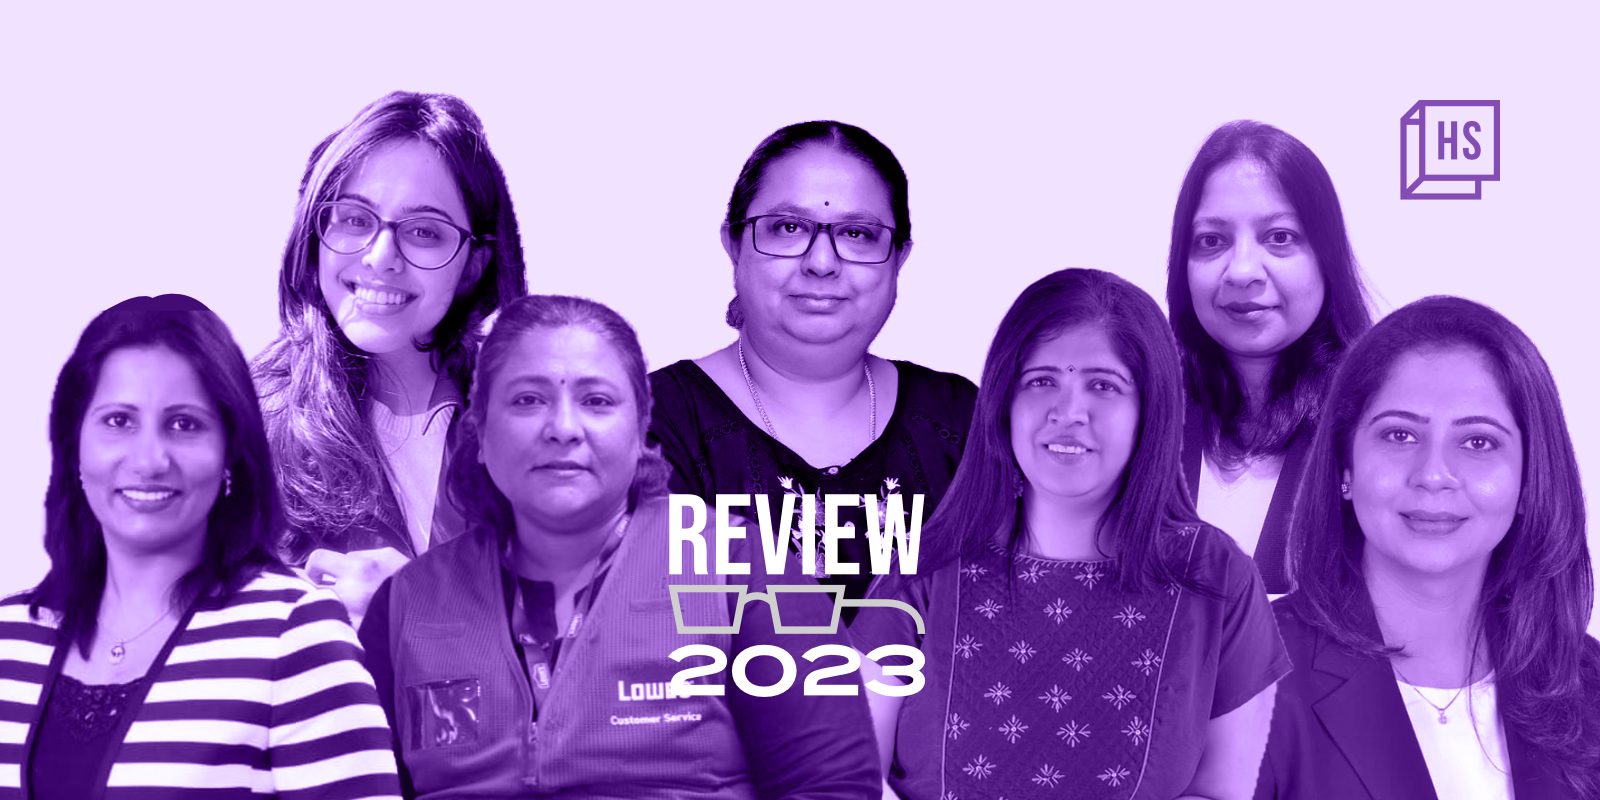 Cracking the code: These Indian women aced the game of technology in 2023